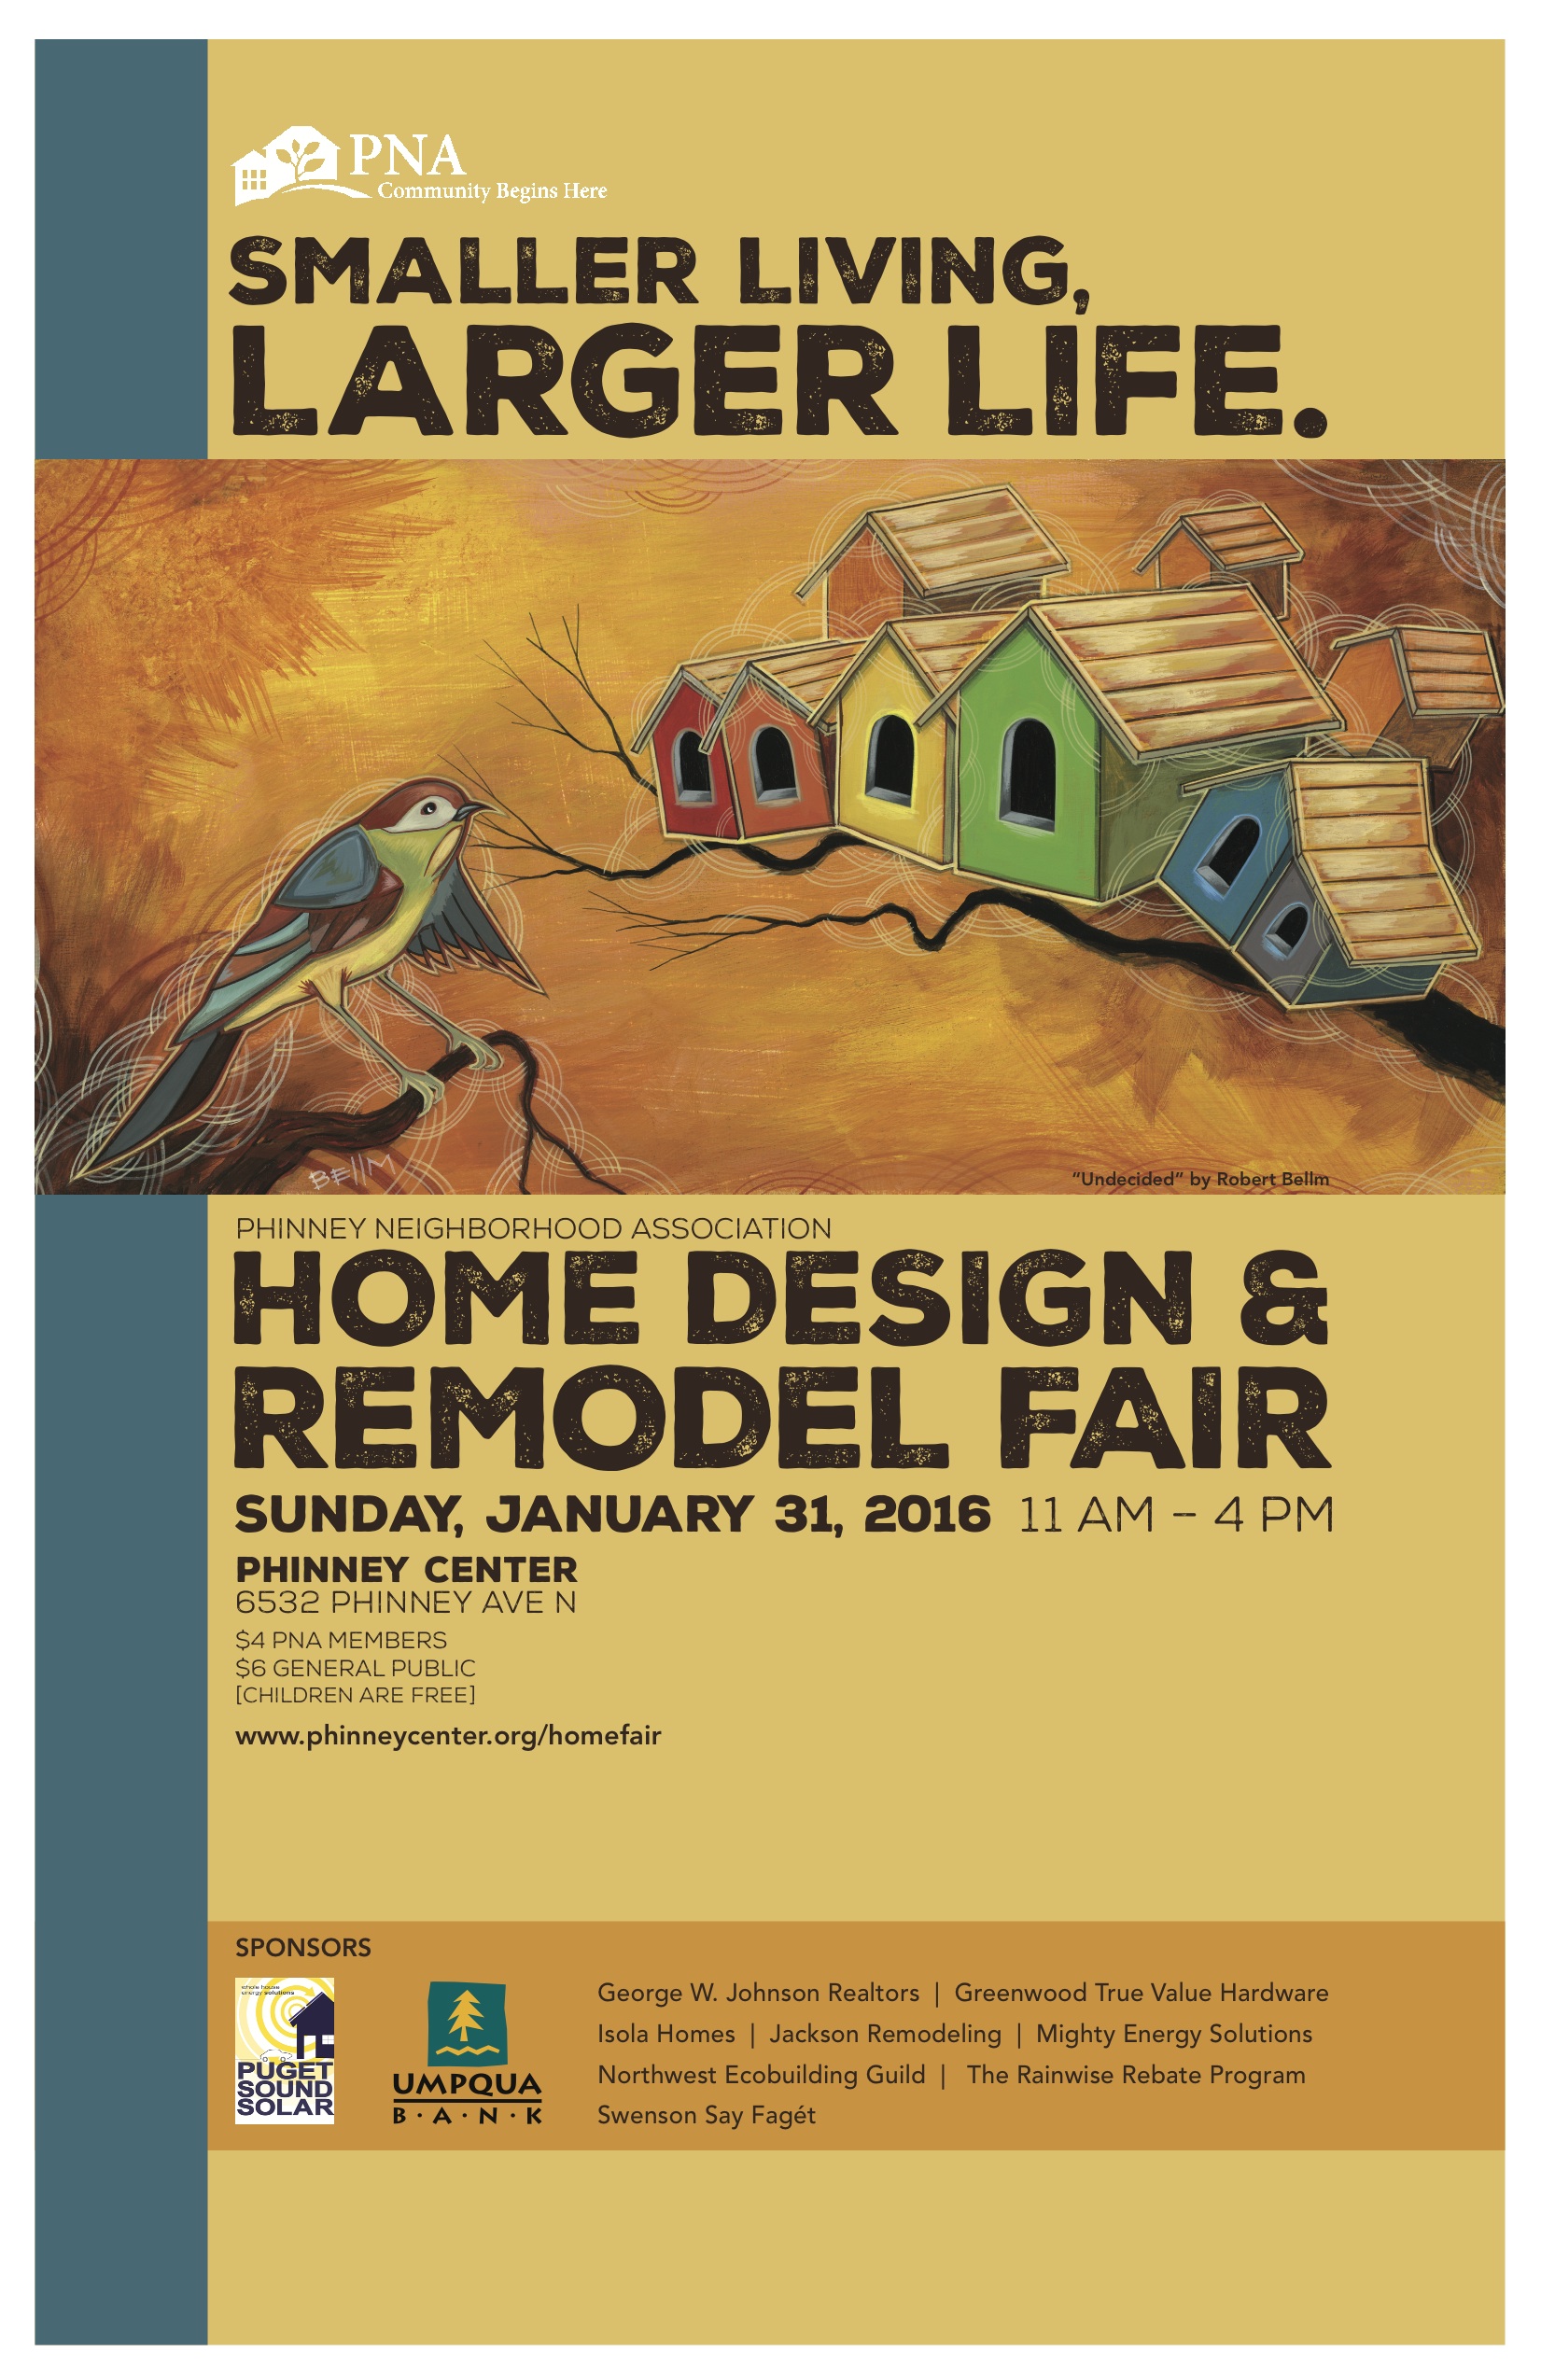 Come by the Phinney Center Home Design and Remodel Fair